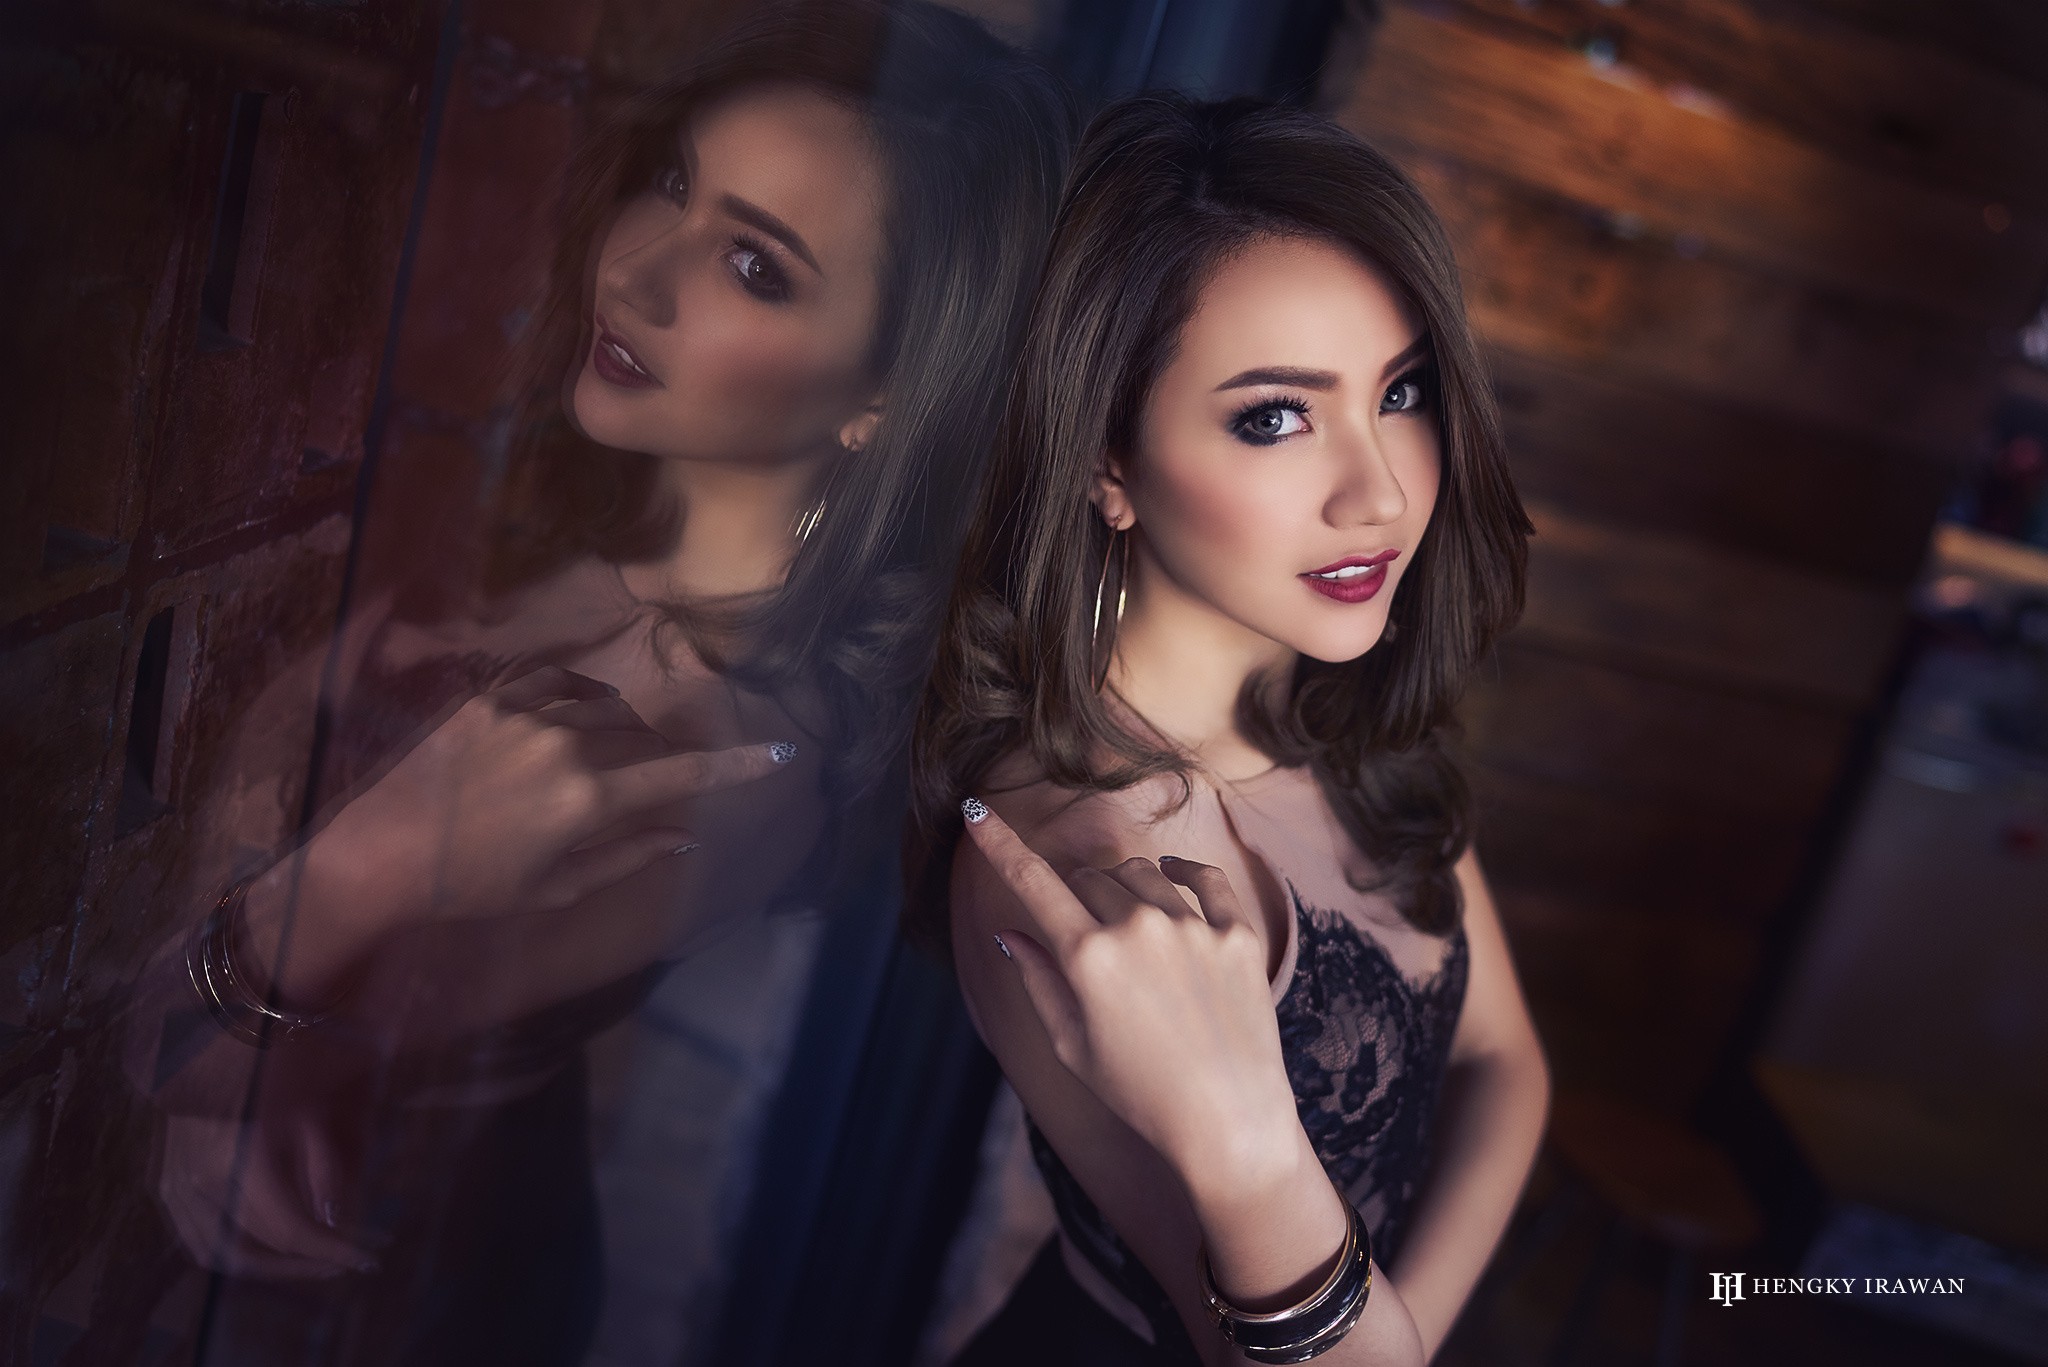 People 2048x1367 women Asian model dress glass reflection portrait smiling looking at viewer painted nails makeup watermarked eyeliner lipstick women indoors indoors long hair